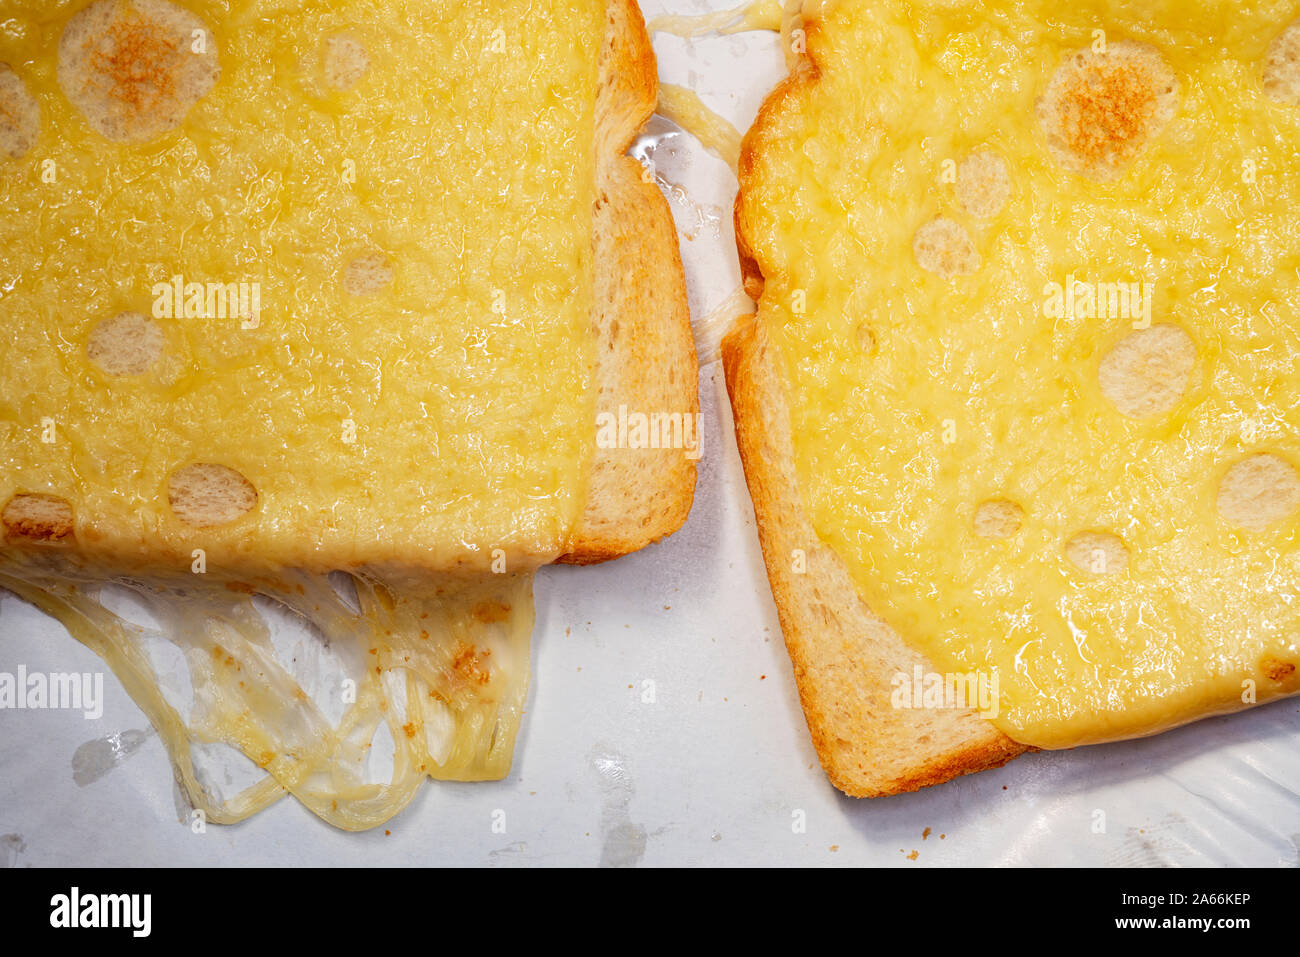 Emmental cheese on toast Stock Photo